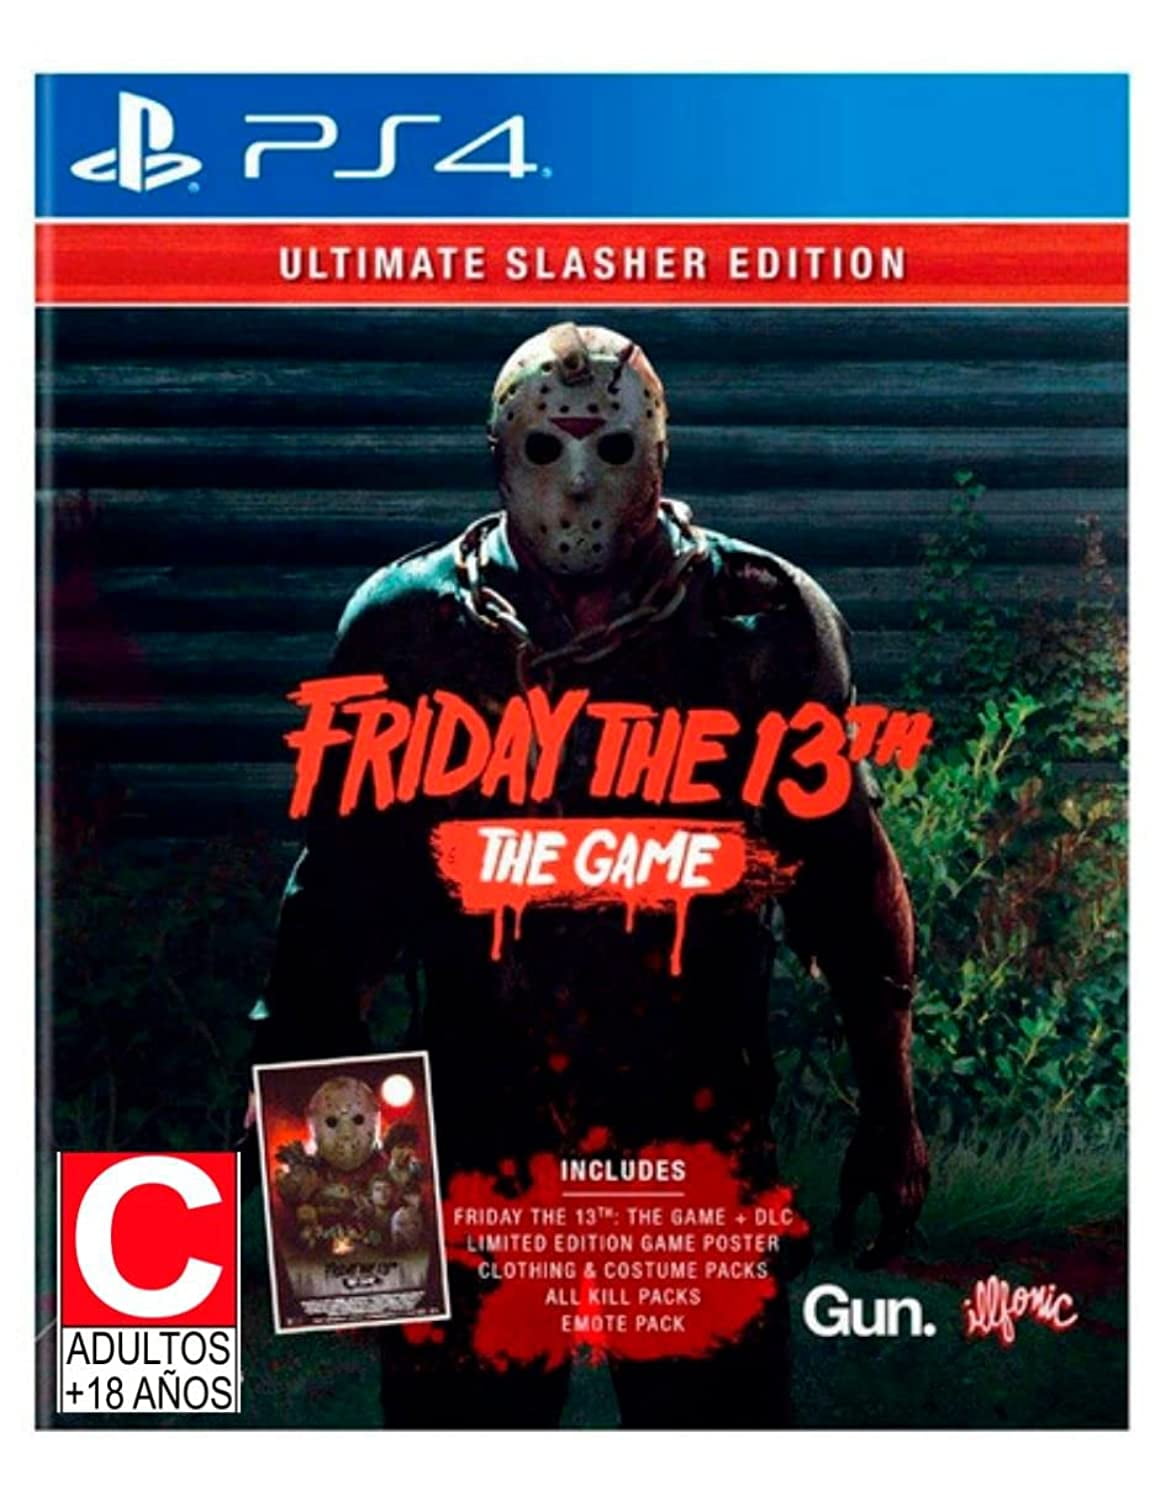 Exclusive: Download The Ultimate Nintendo Friday The 13th Game Strategy  Guide! - Friday The 13th: The Franchise